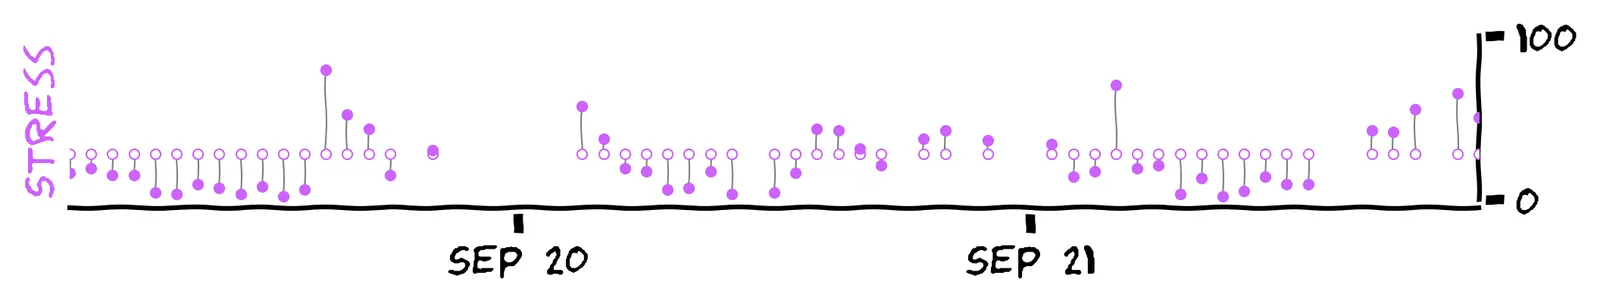 The previous plot, with predictions added. At each time point, there is an outlined purple point representing a prediction. From each prediction, a line is drawn to the corresponding solid purple point. The predictions are all in a long horizontal line.